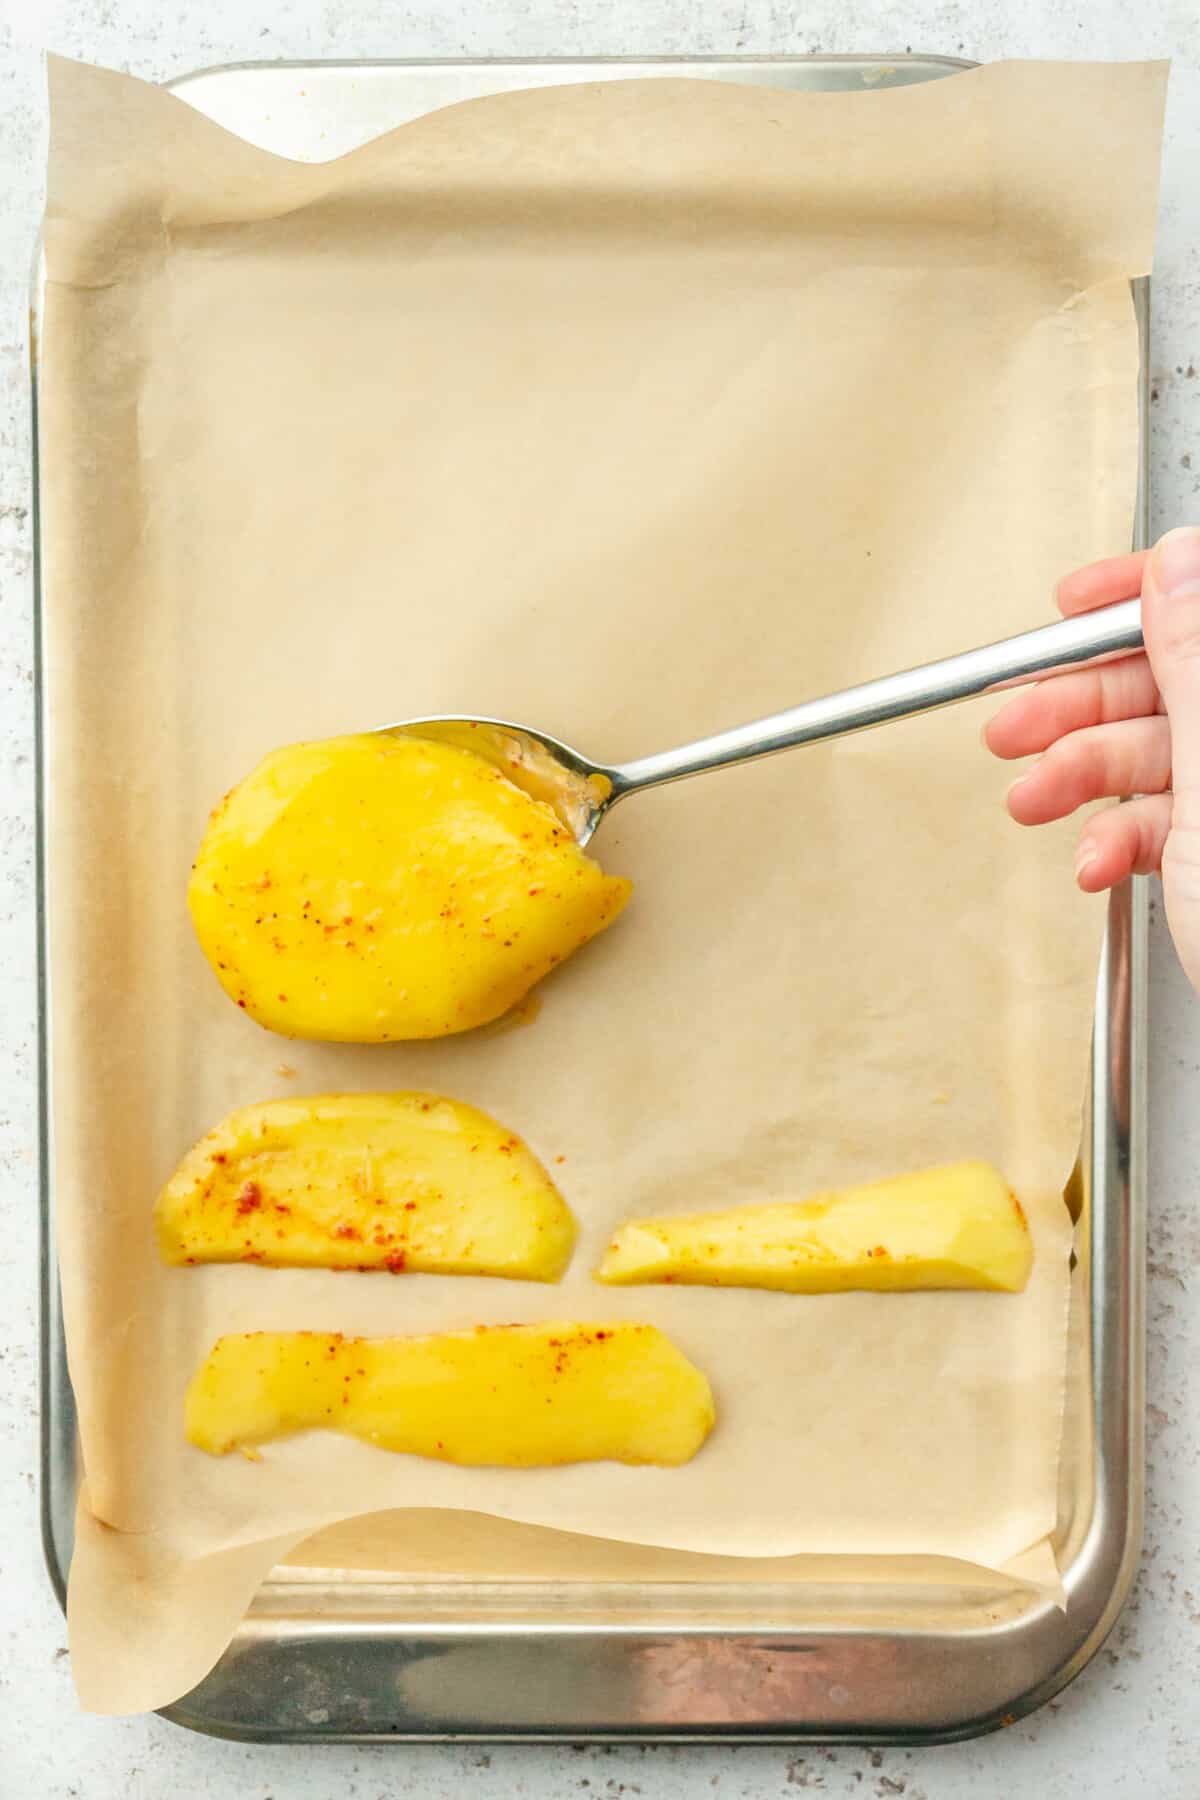 Slices of mango with spots of bright chili are laid onto a lined baking tray on a light grey colored surface.